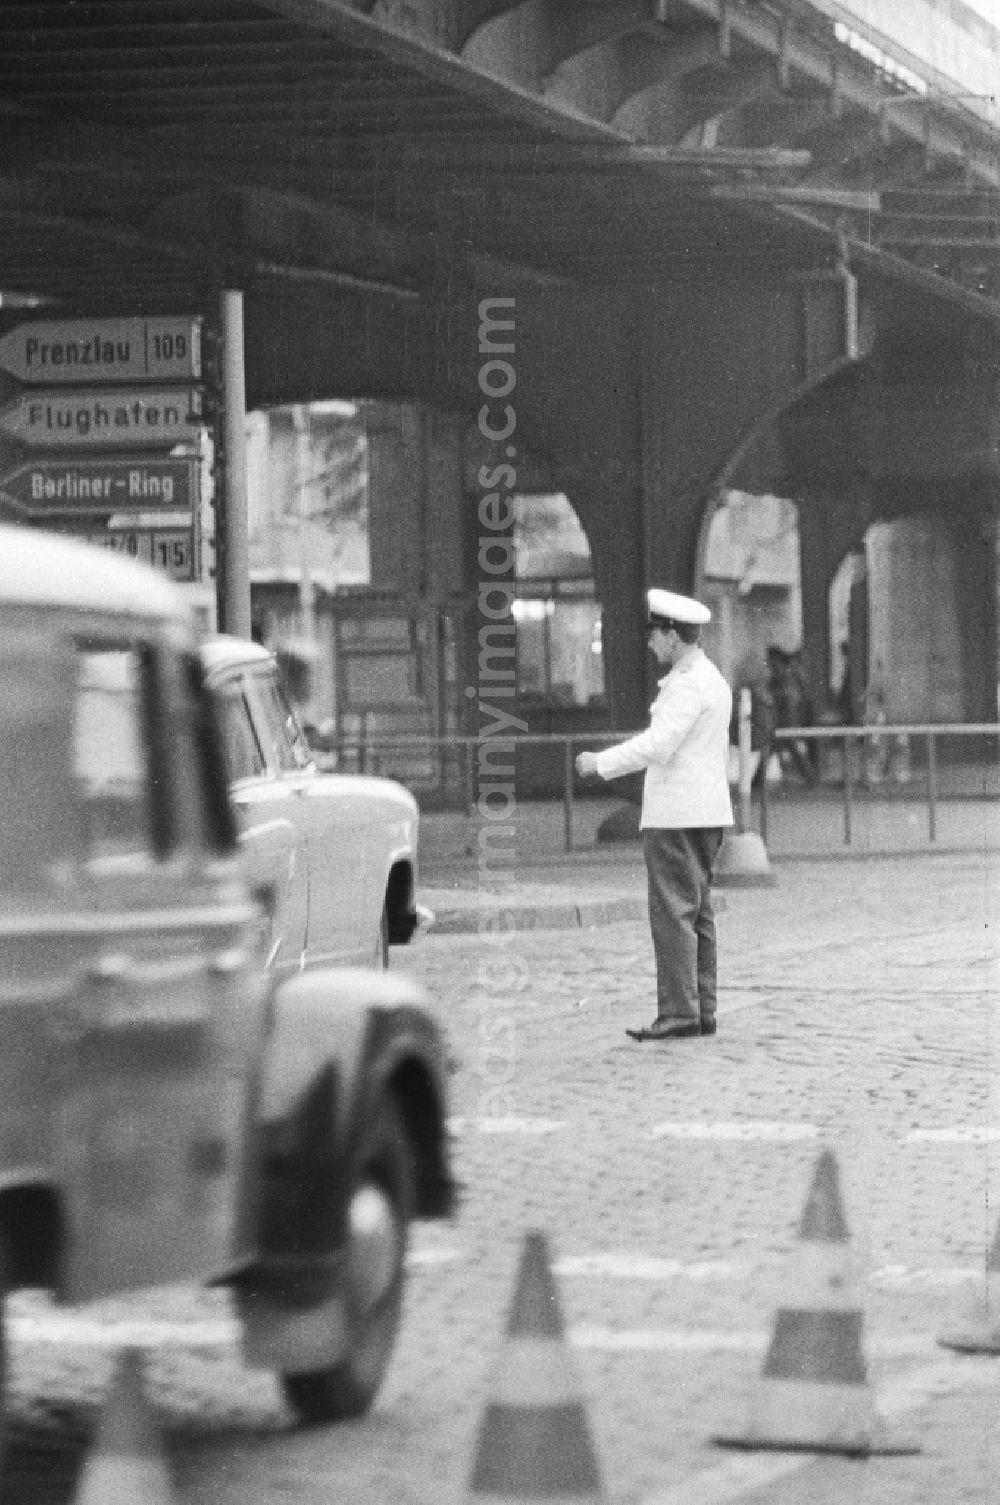 GDR picture archive: Berlin - Practical training in the People's Police / Traffic Police in Berlin, the former capital of the GDR, German Democratic Republic